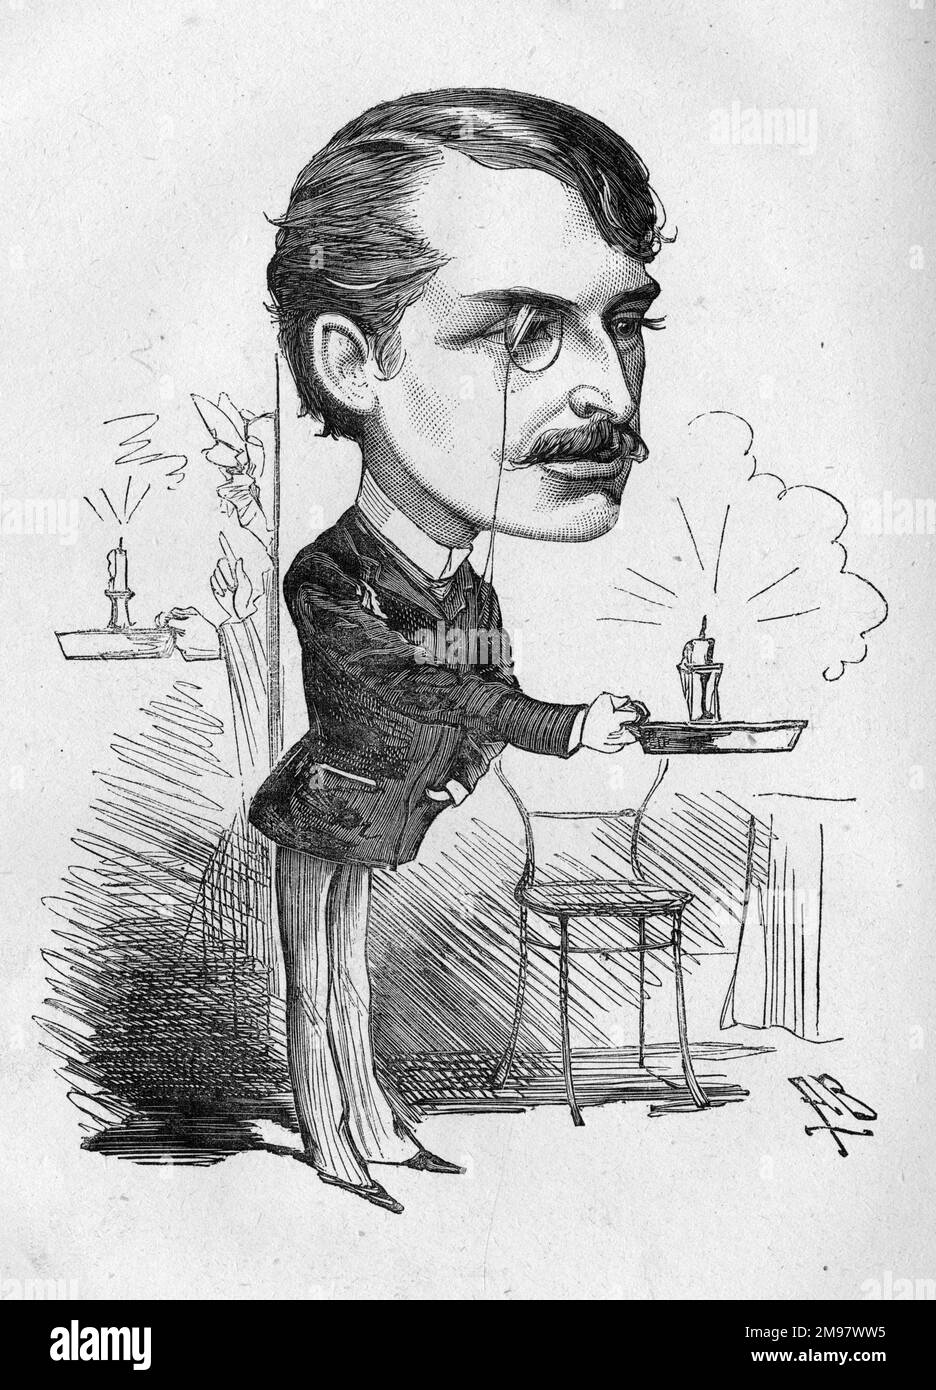 Cartoon of Richard Claude Carton (Richard Claude Critchett, 1856-1928), British actor and playwright. Seen here in the role of Barnes Durant in A W Pinero's play, Imprudence, in production at the Folly Theatre, London. Stock Photo